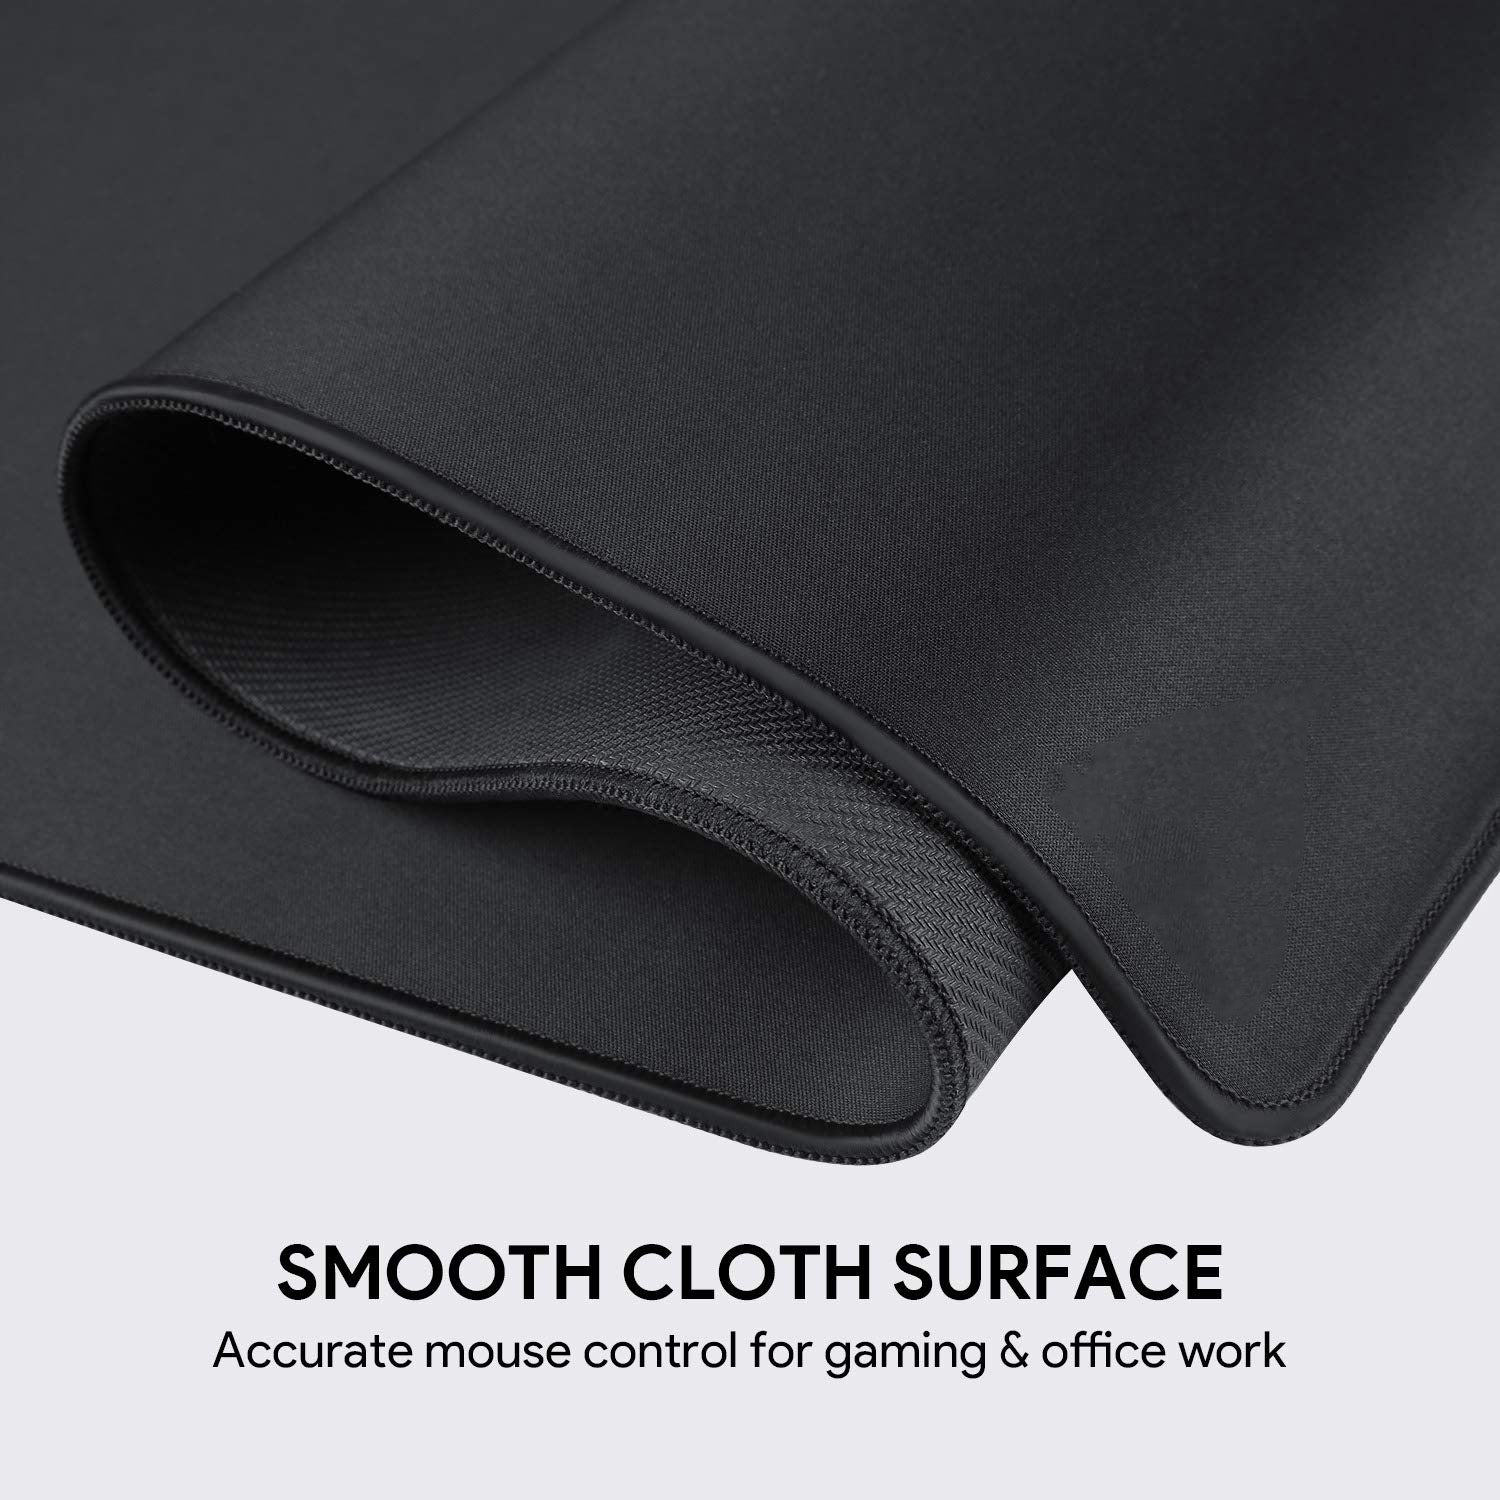 Smooth Cloth Surface, Firm Mouse Pad, Wrist Protection